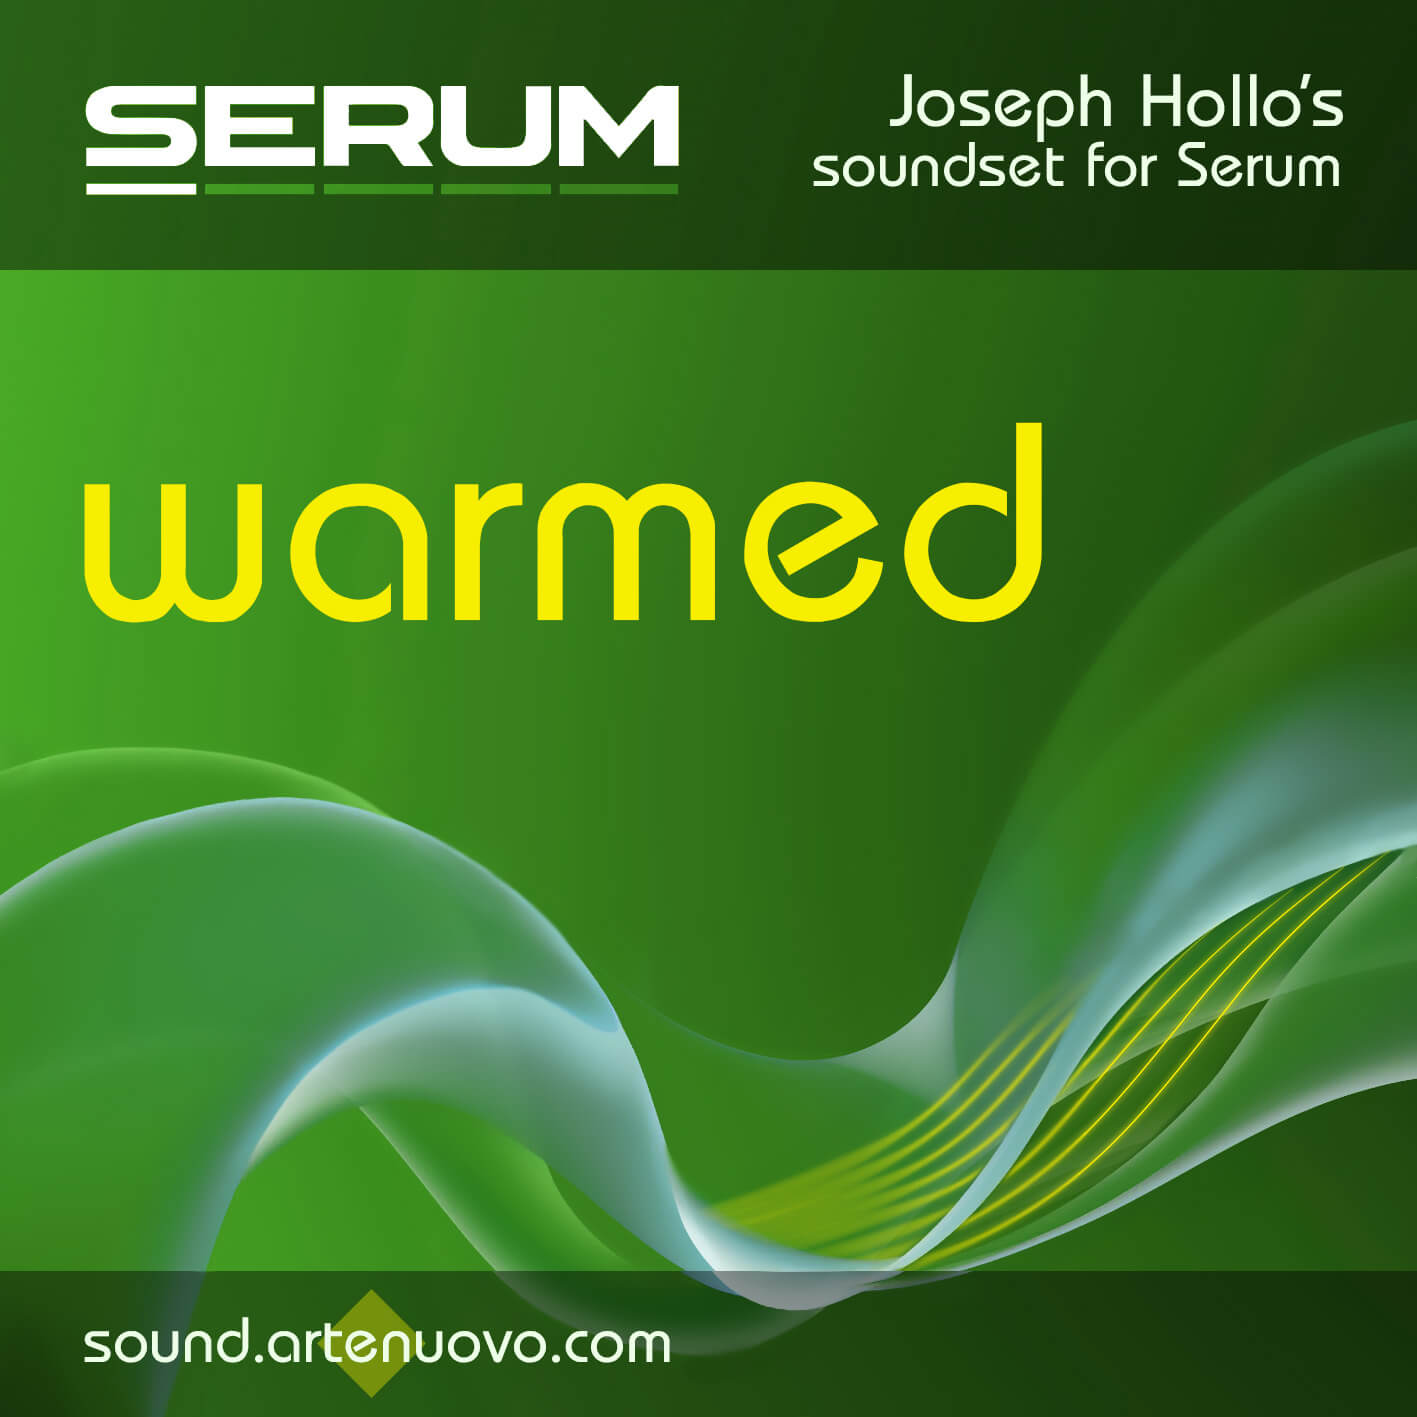 Warmed for Serum by Joseph Hollo